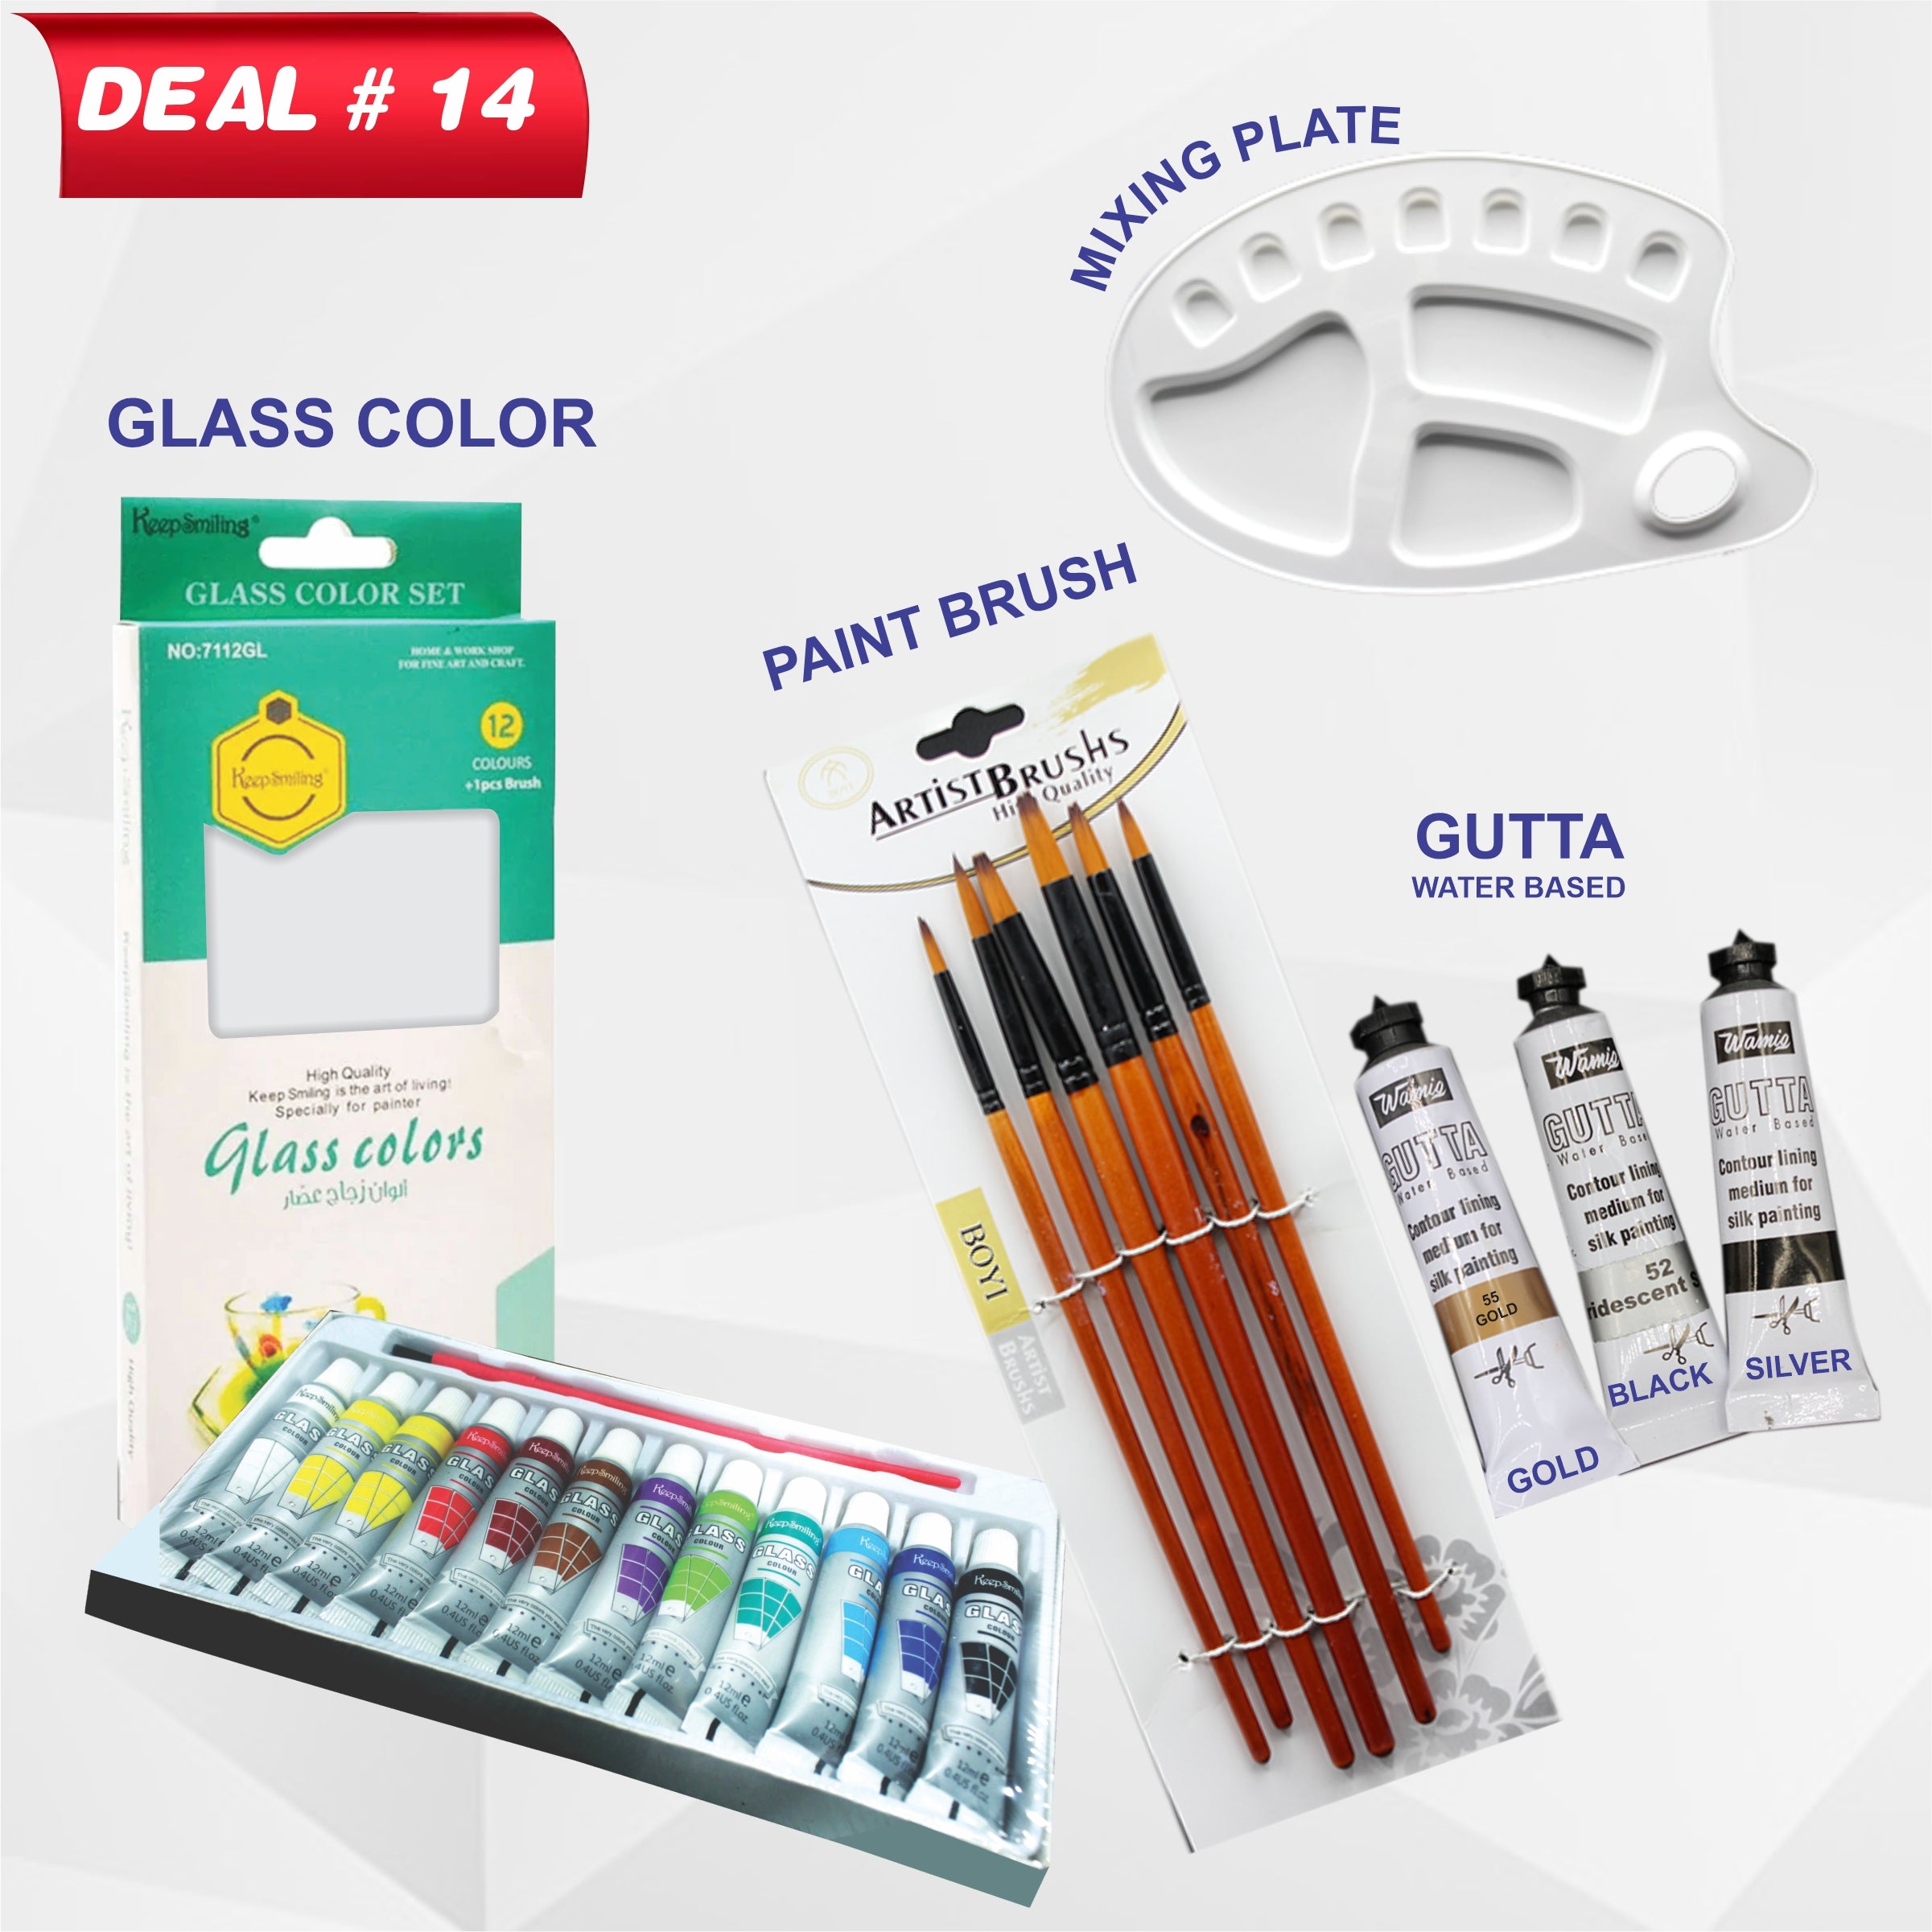 Glass Painting Deal No. 14